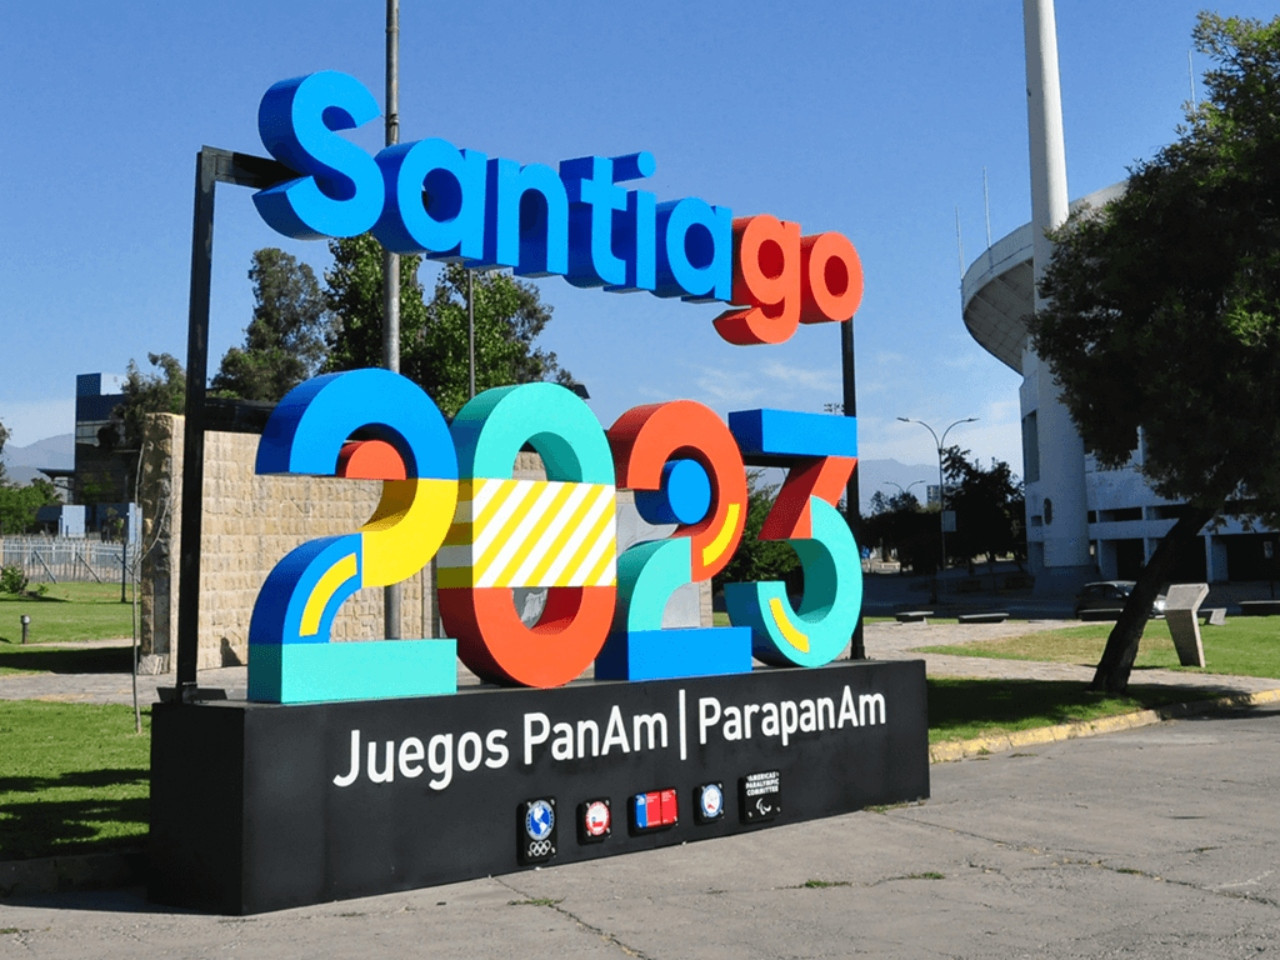 More than 6,000 athletes are expected to compete across 38 sports during the Santiago 2023 Pan American Games ©Santiago 2023